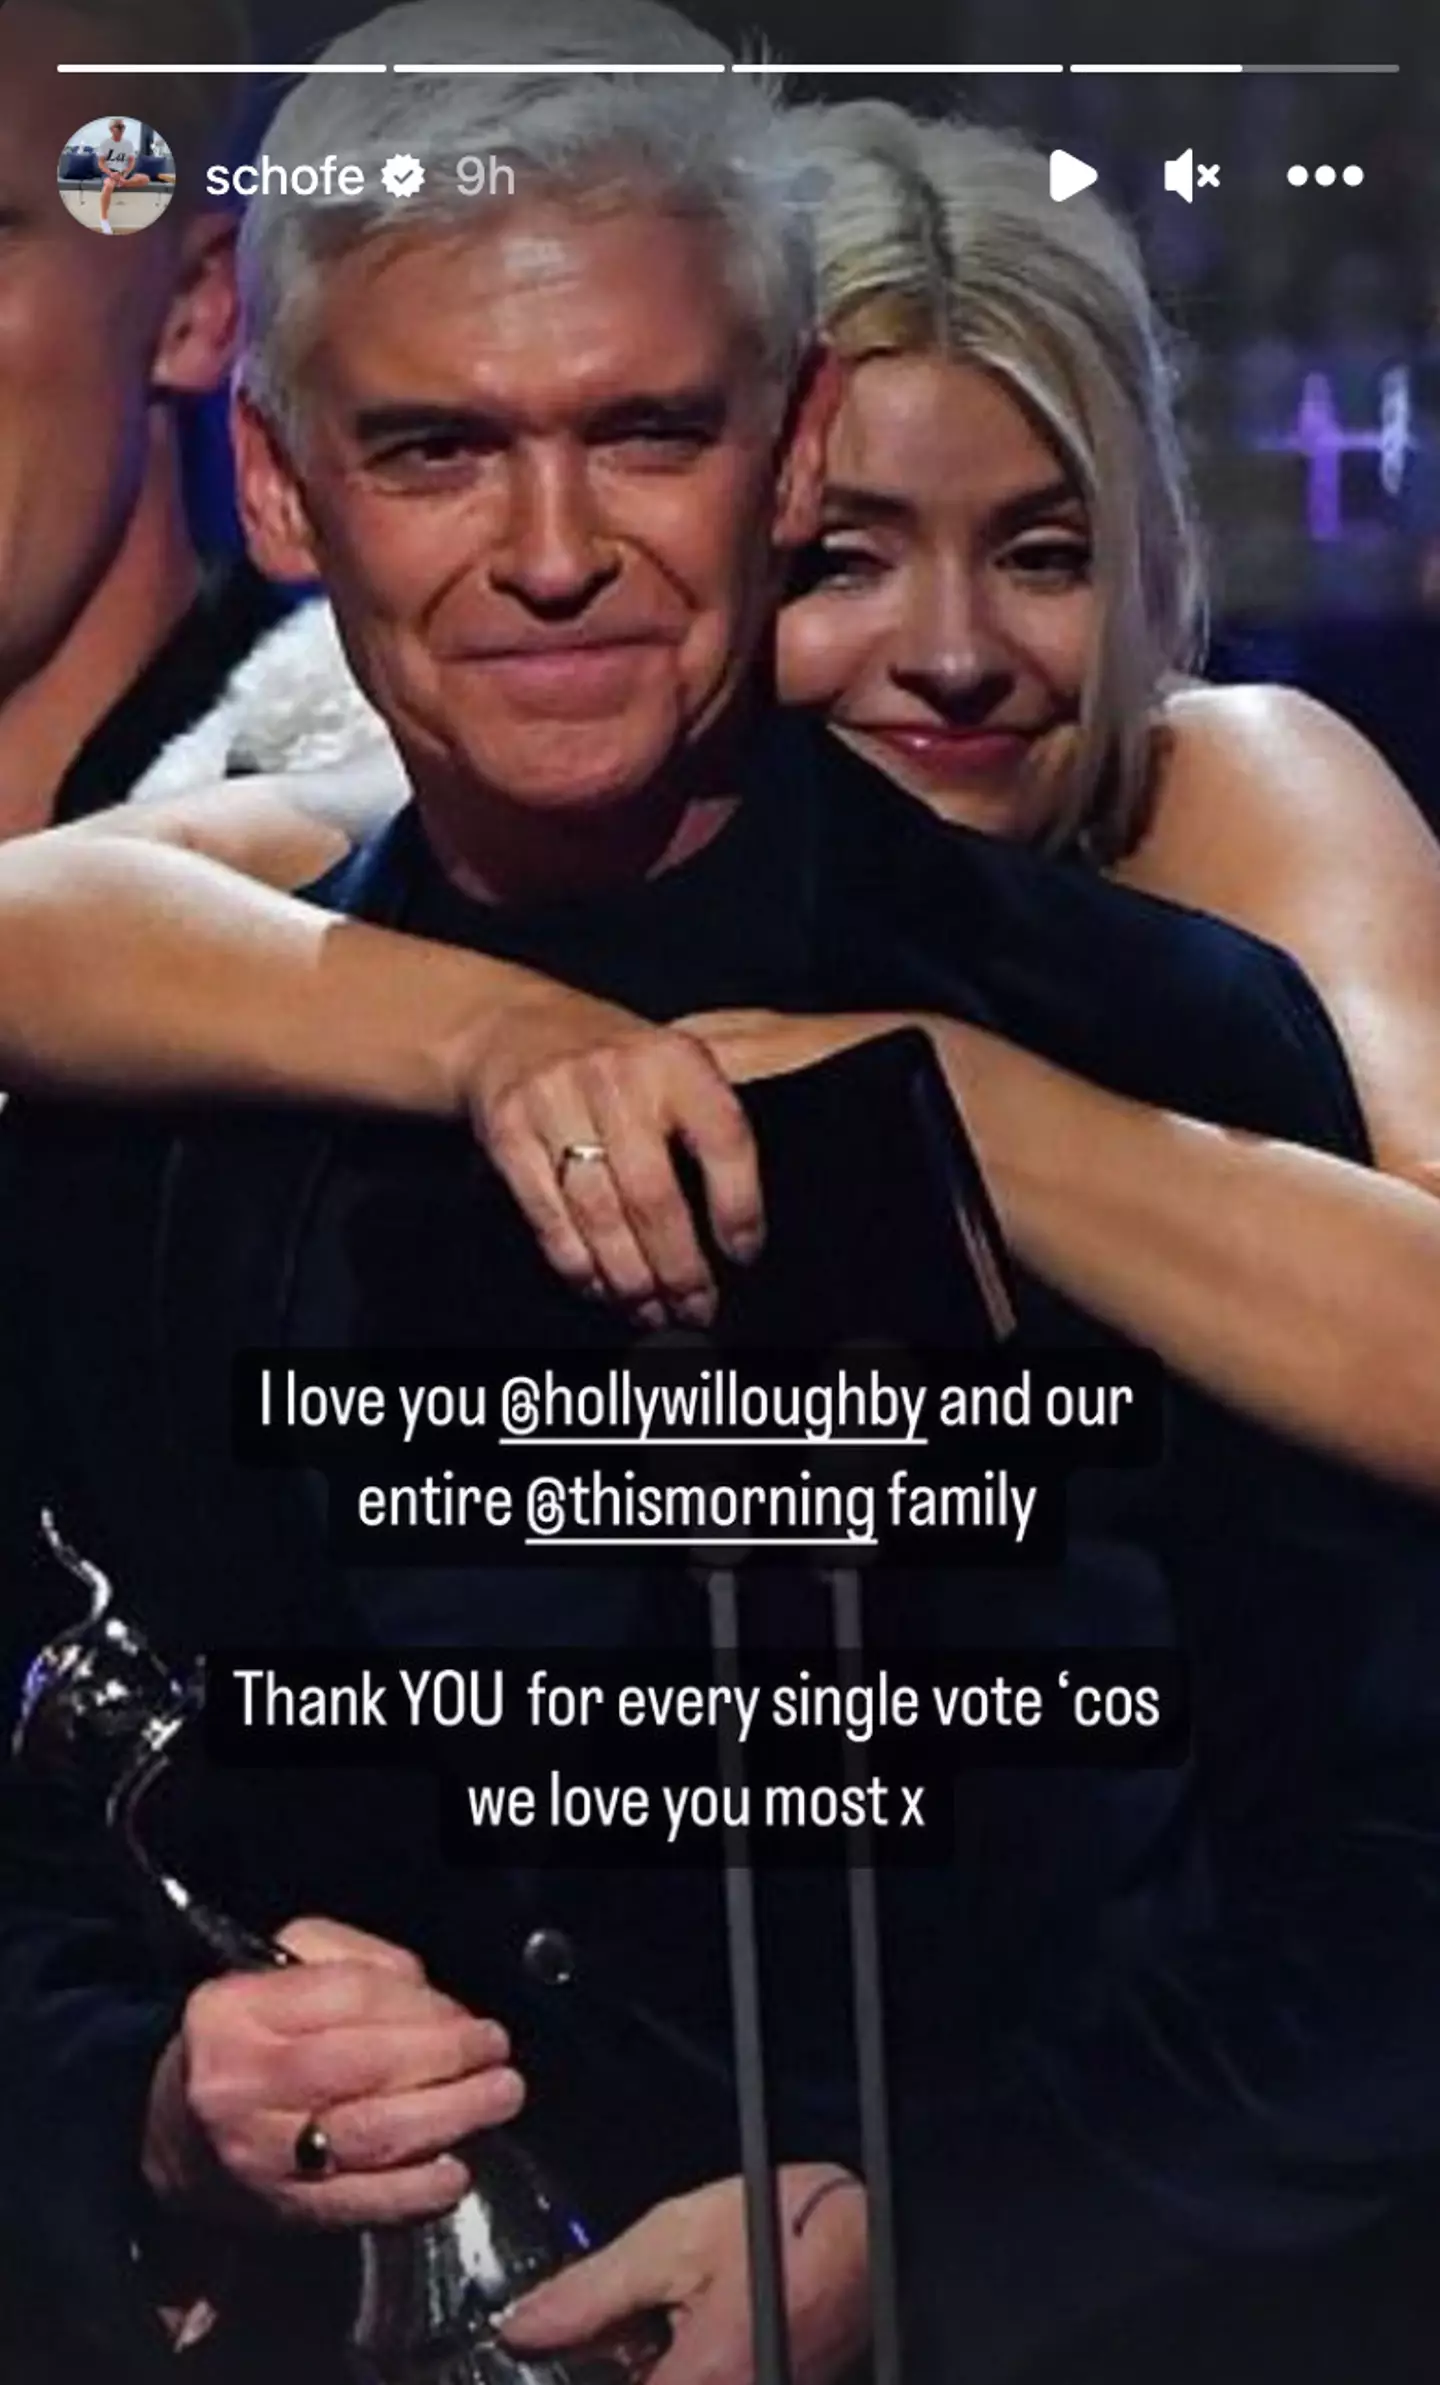 Phillip thanked Holly and their fans for the award.